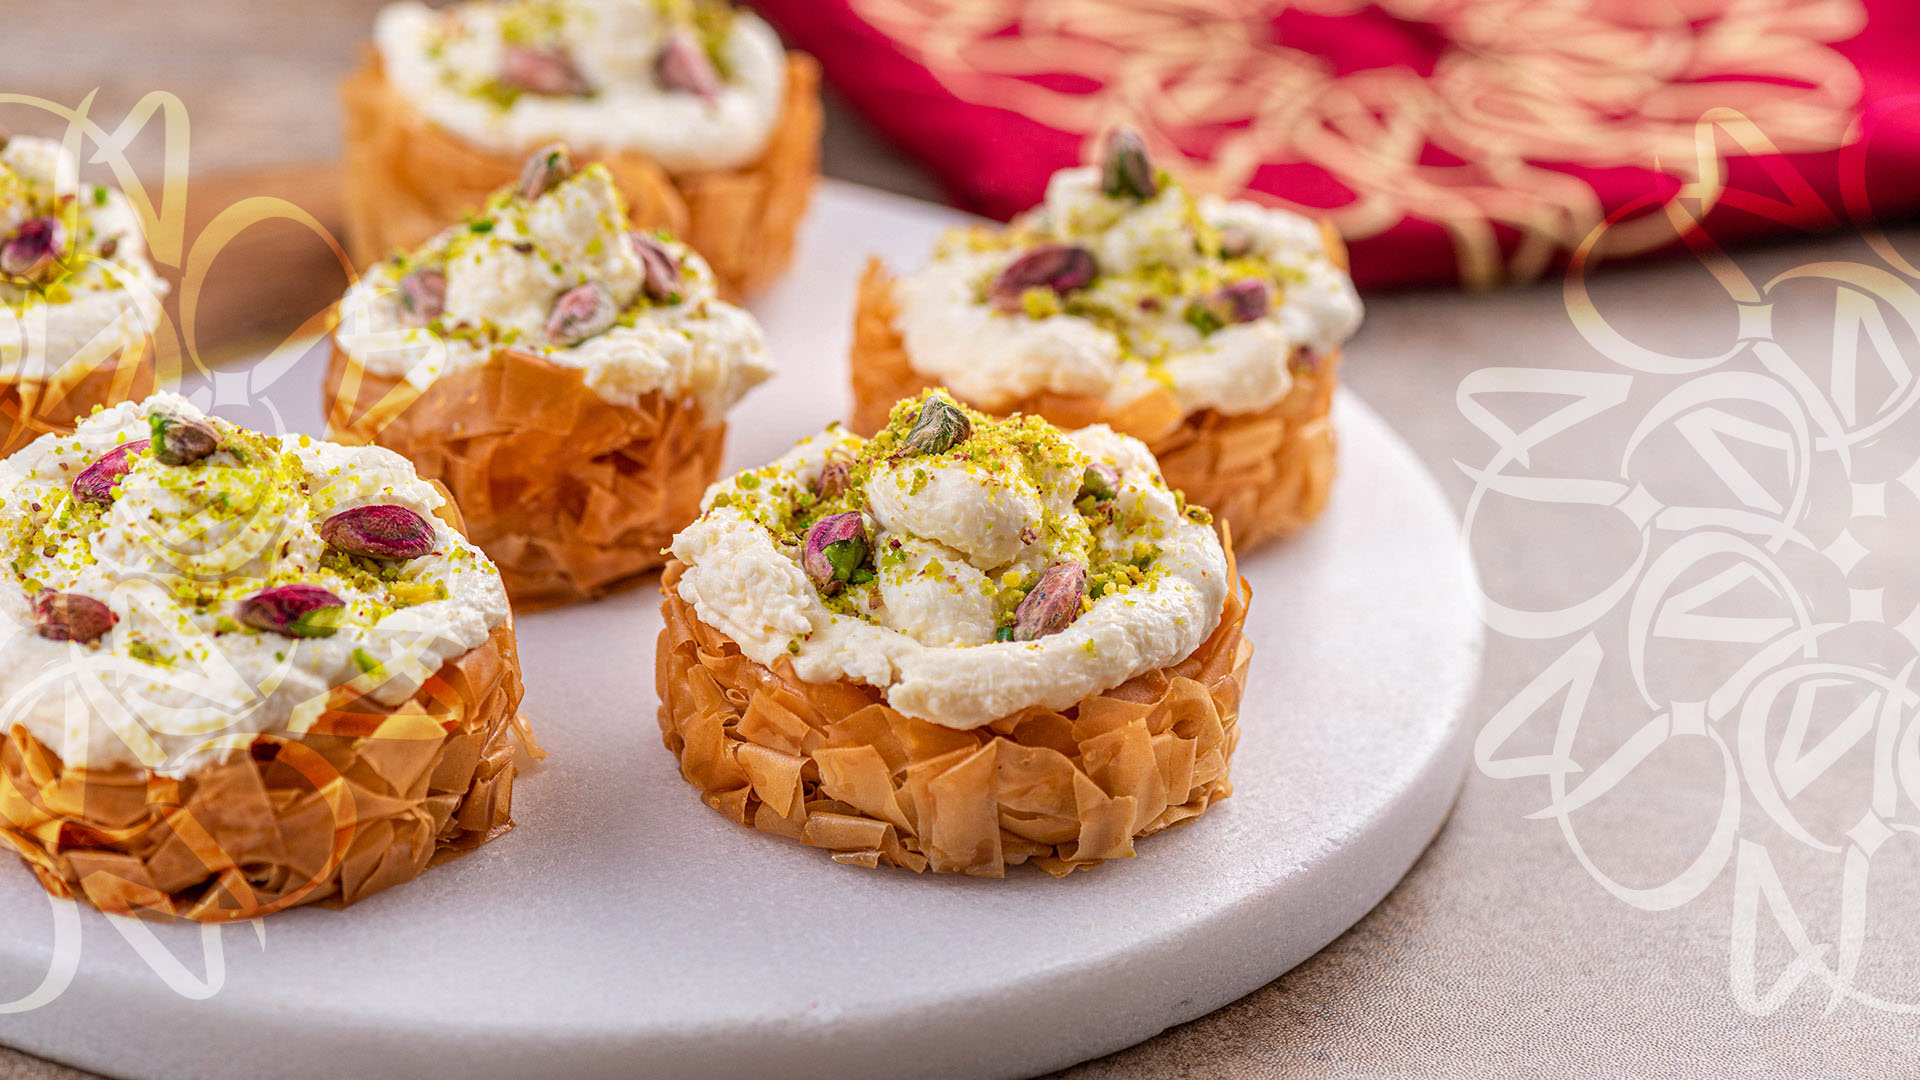 Wedding Wonders: Make Your Big Day Sweeter with Our Arabic Delicacies​